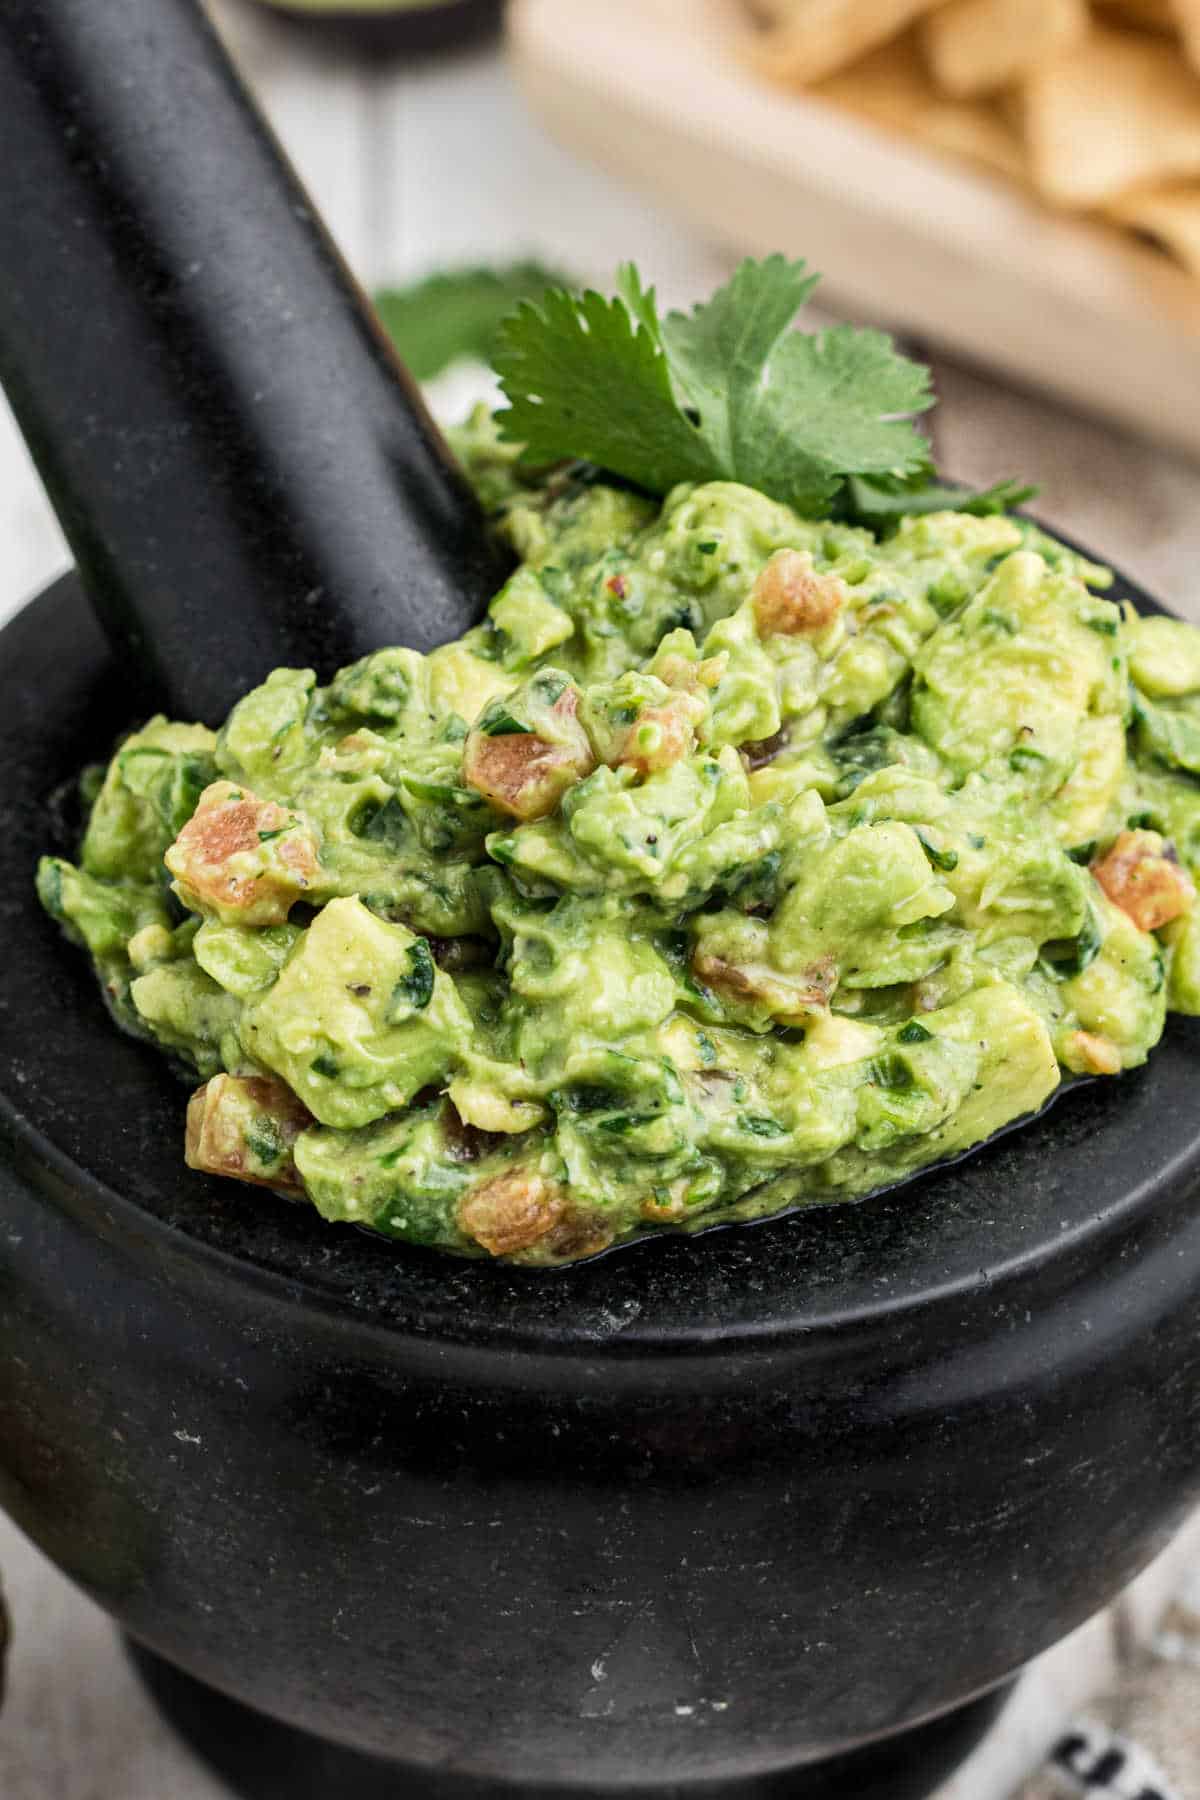 Molcajete Guacamole - a mortar and pestle filled with guacamole.